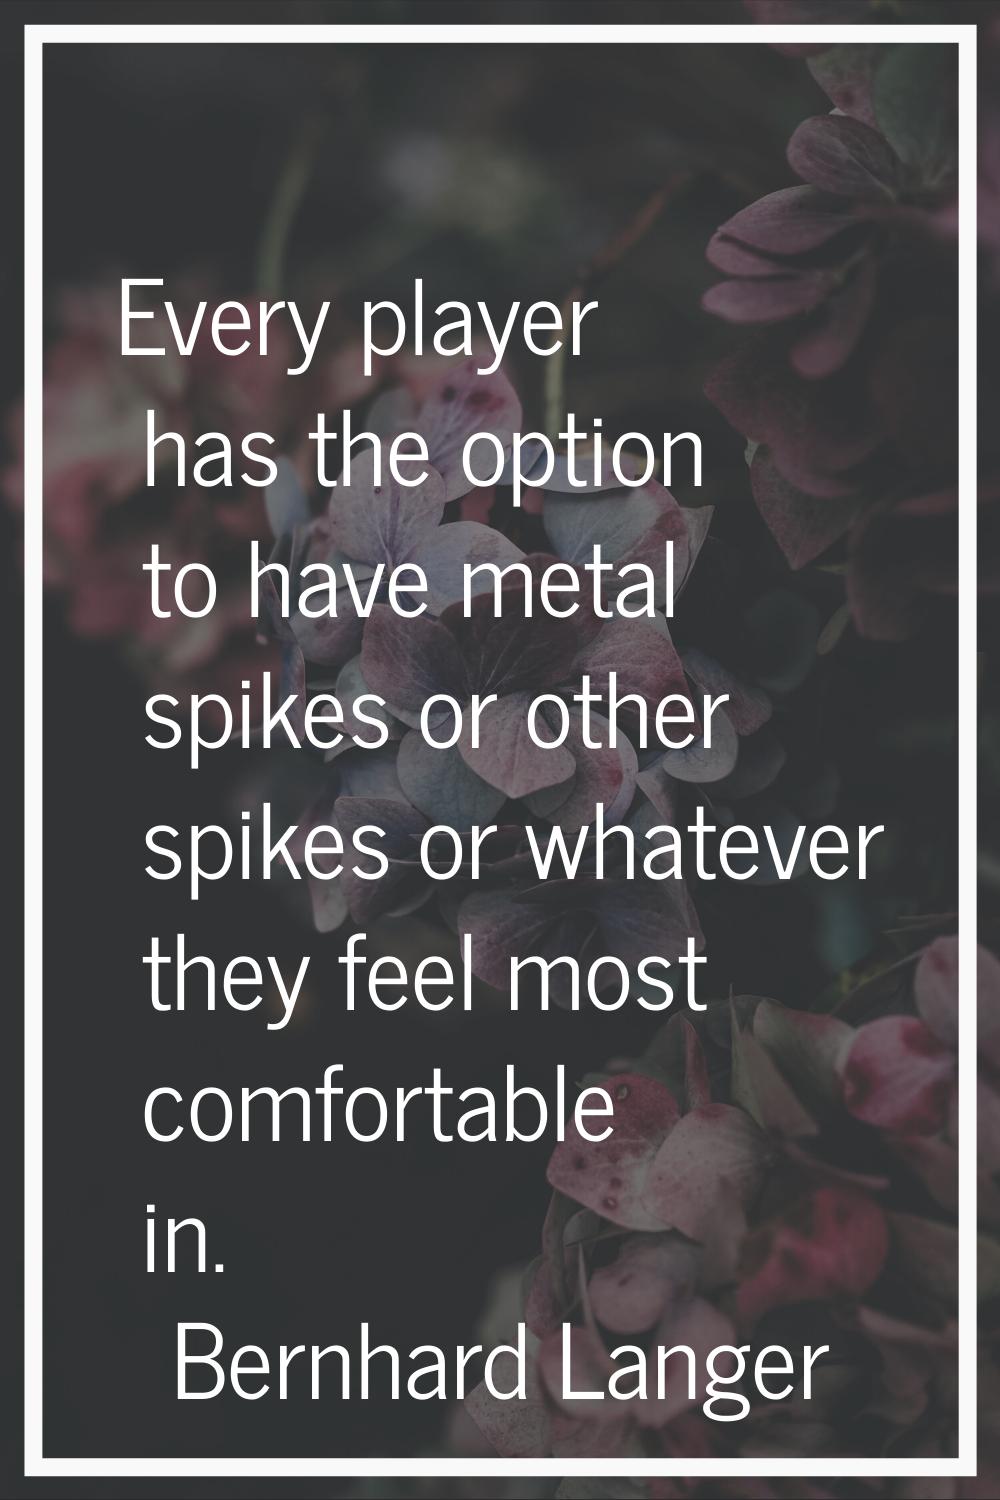 Every player has the option to have metal spikes or other spikes or whatever they feel most comfort